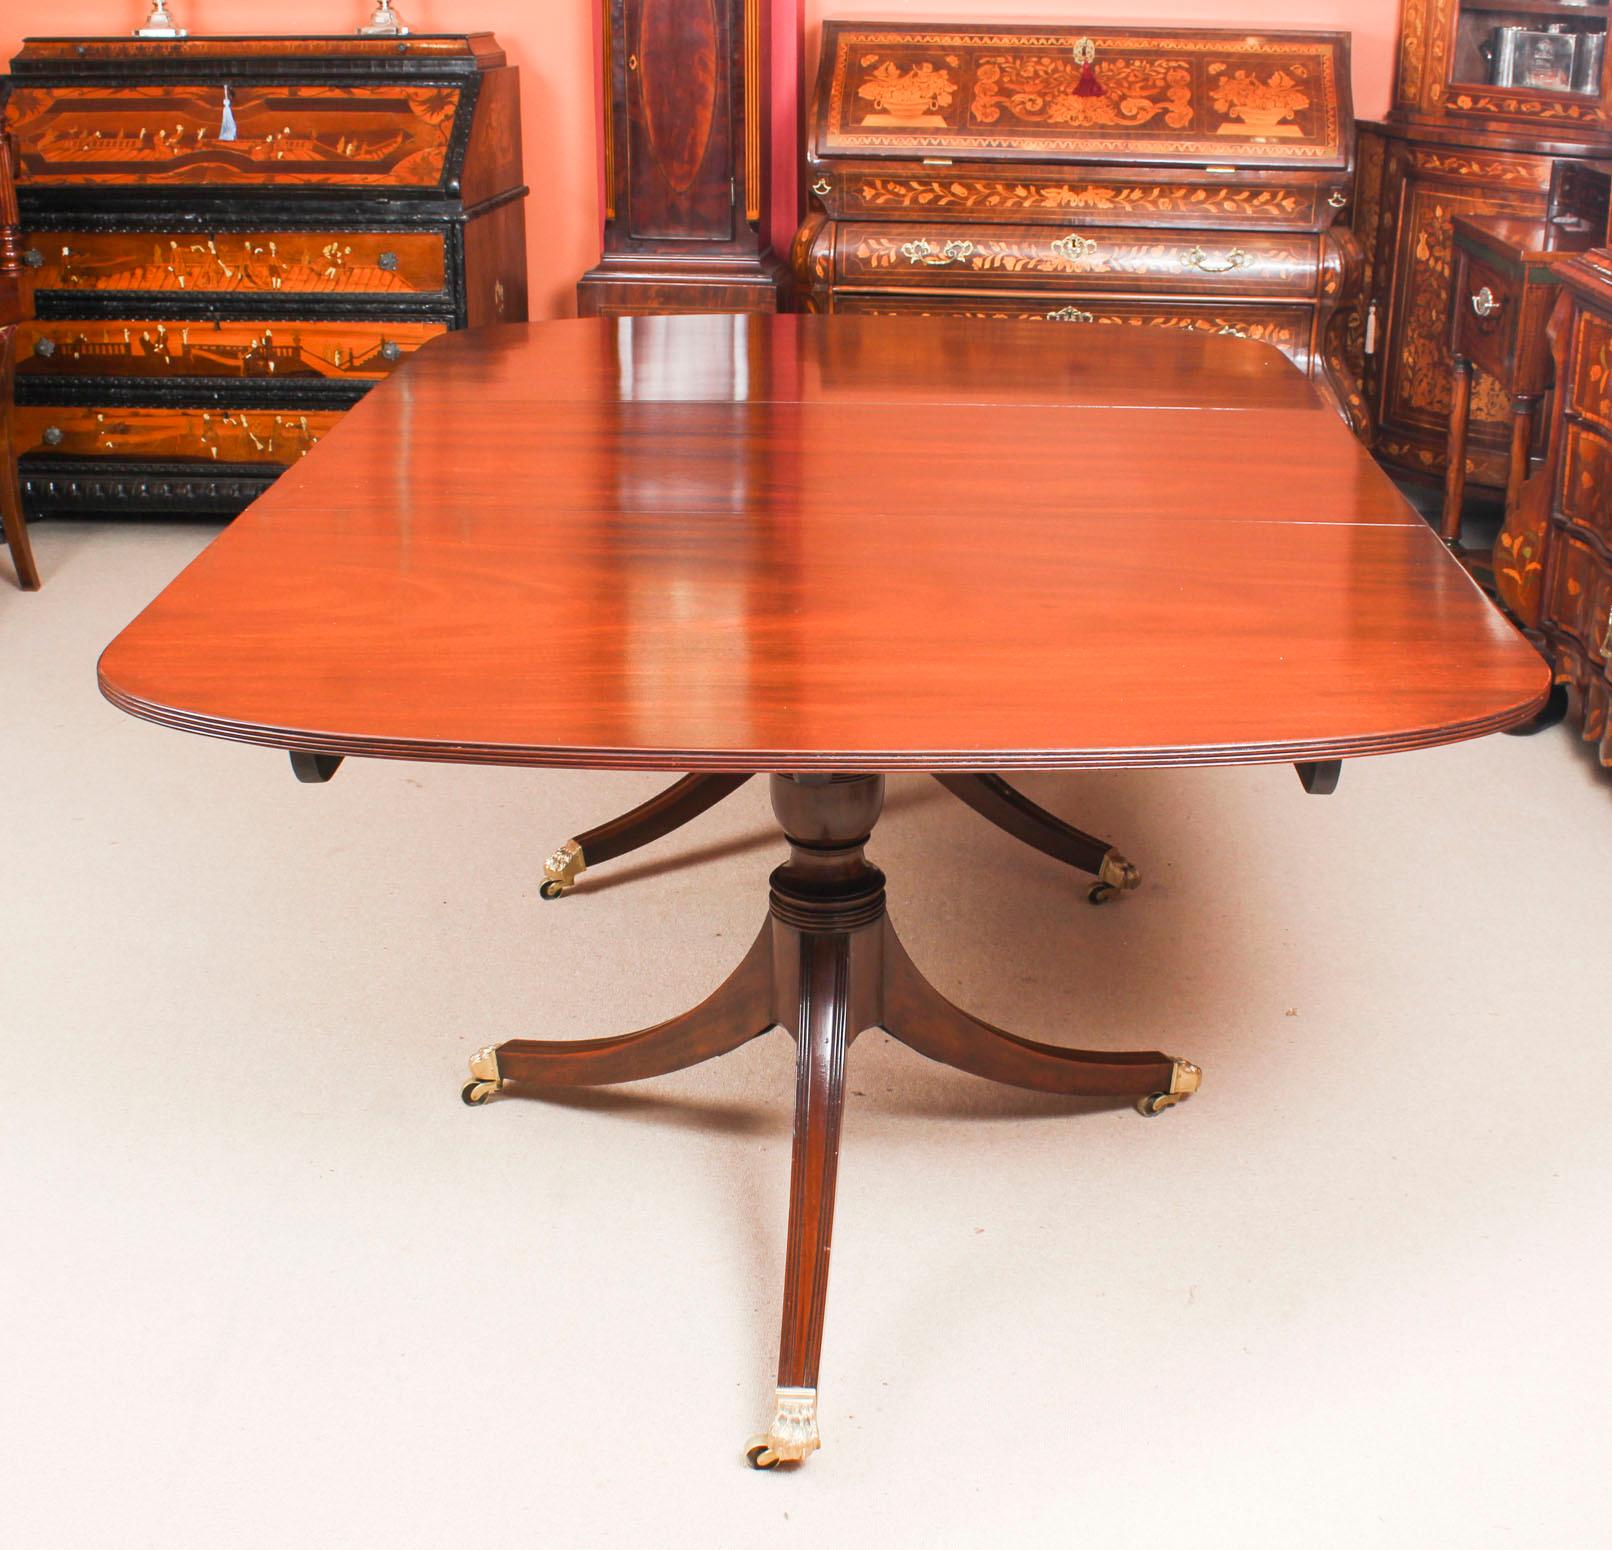 Early 19th Century George III Regency Dining Table 19th Century with 8 Bespoke Dining Chairs